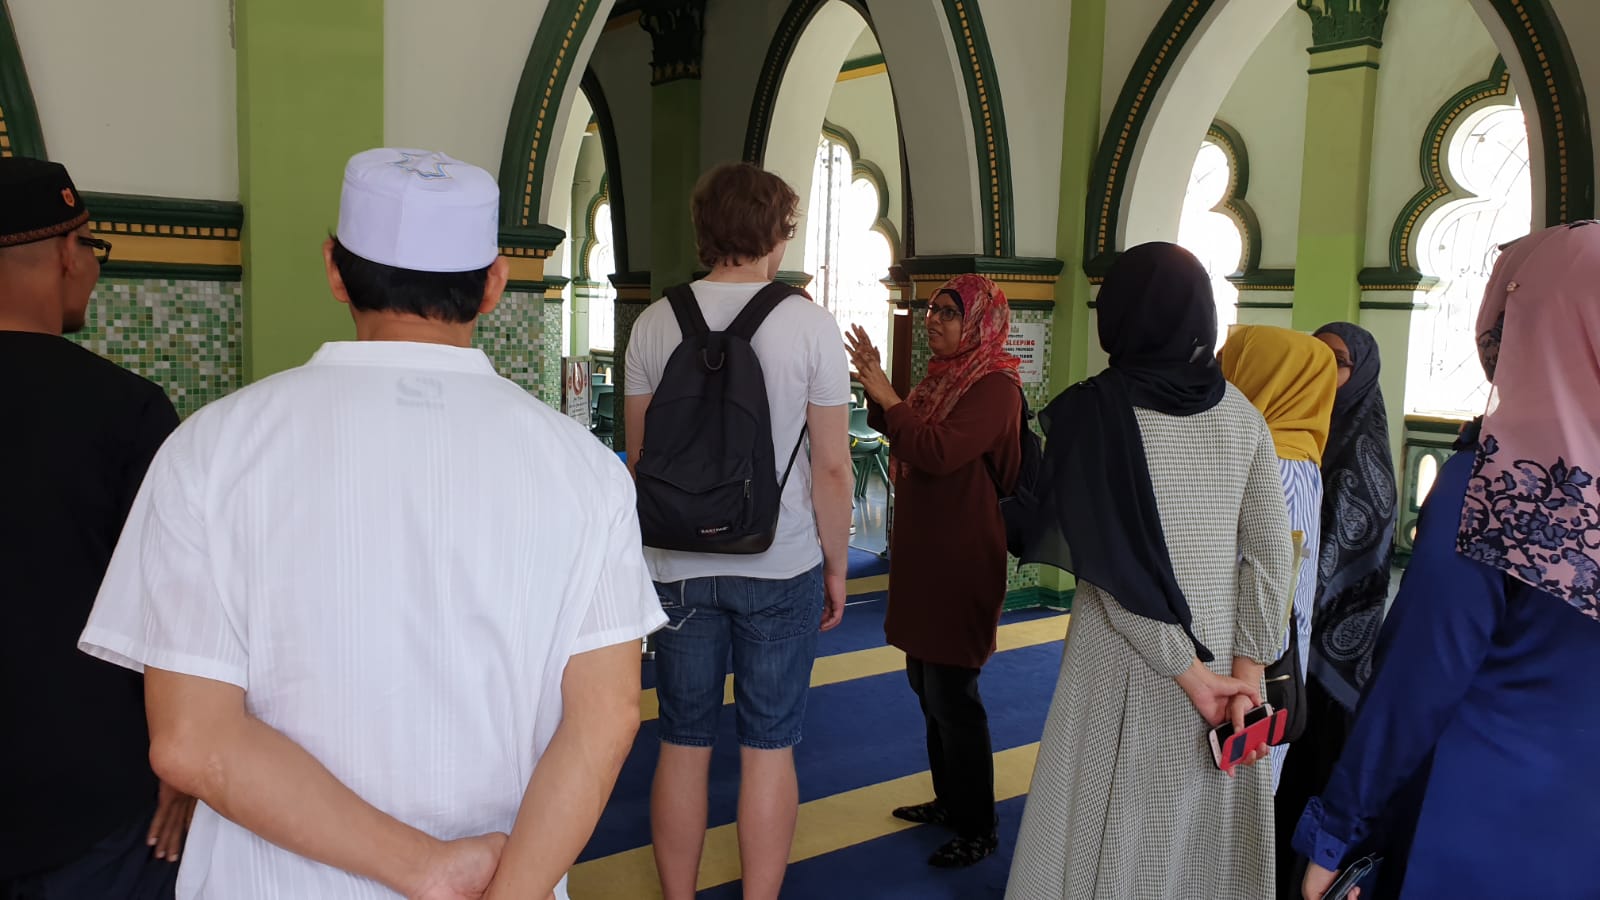 DATP students interacting with tourists during field practice